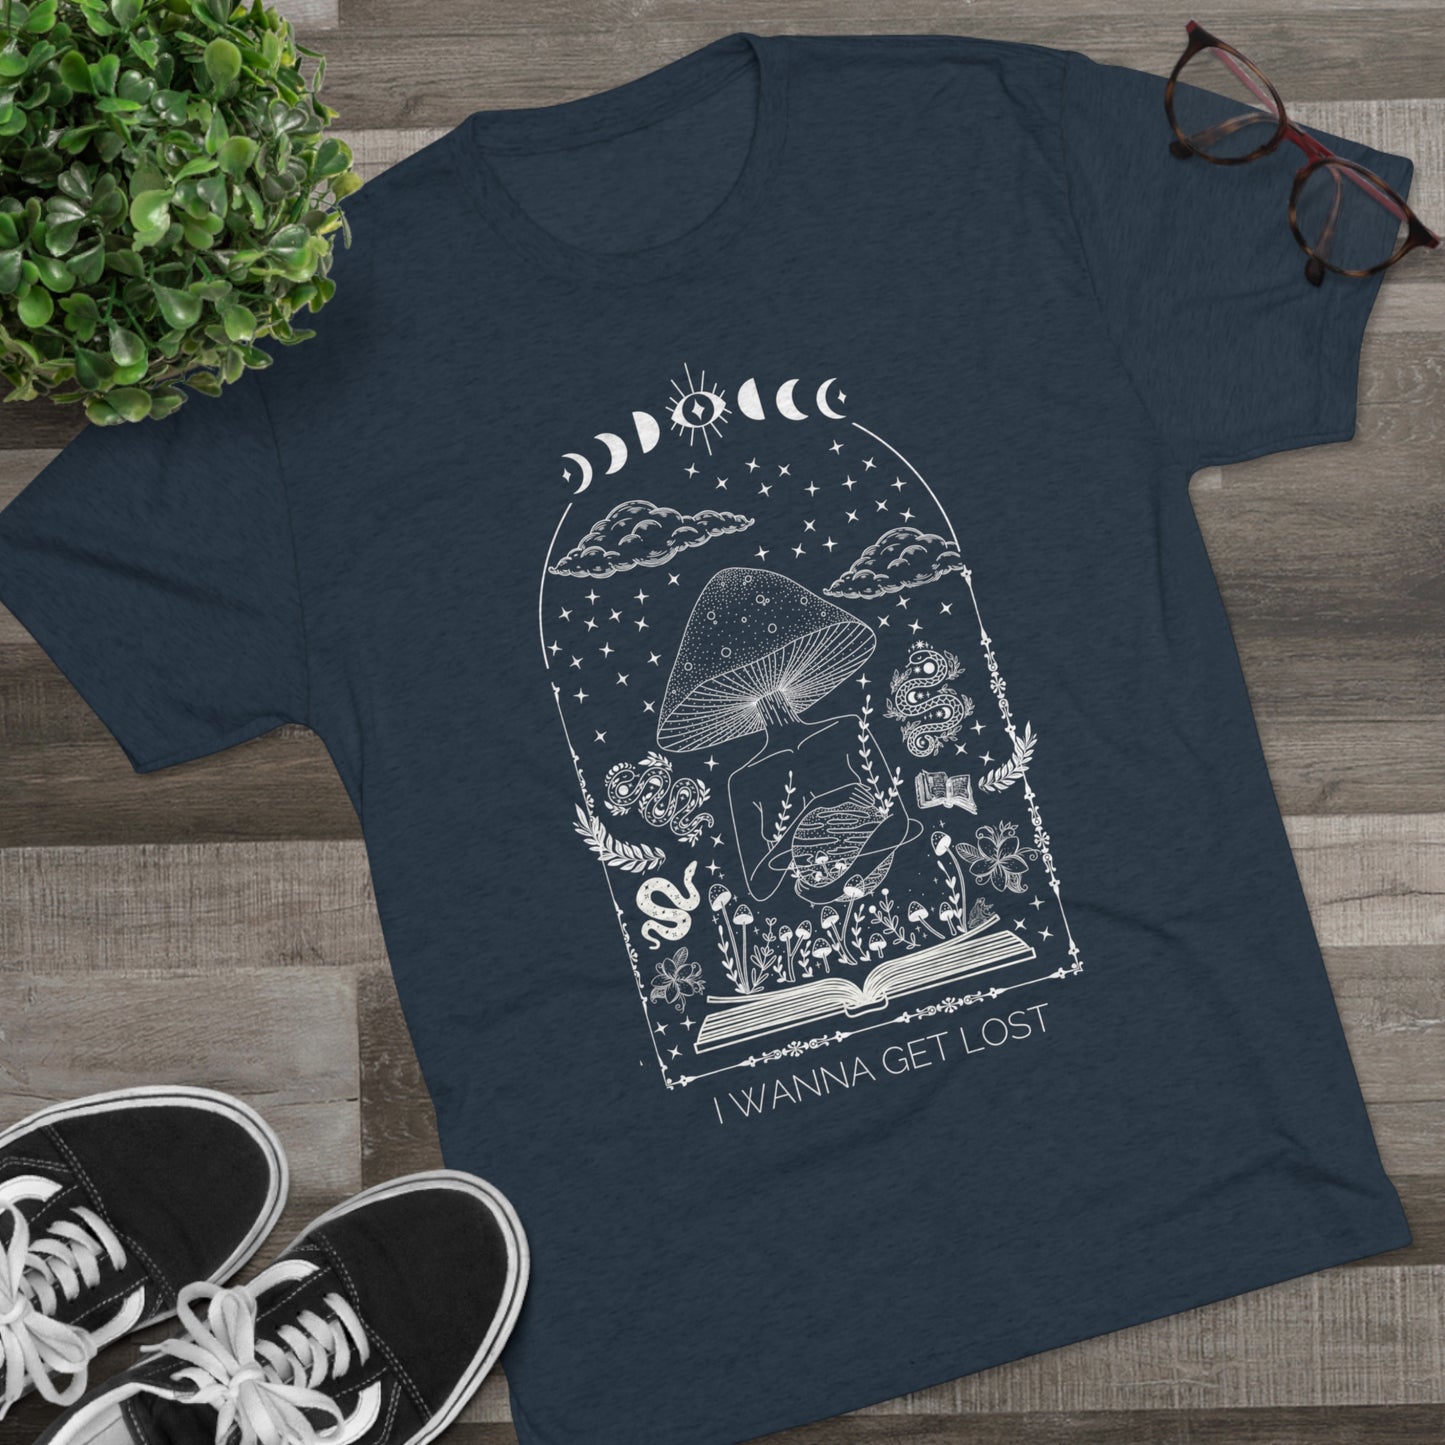 I Wanna Get Lost (In a Book) Tri-Blend Crew Tee